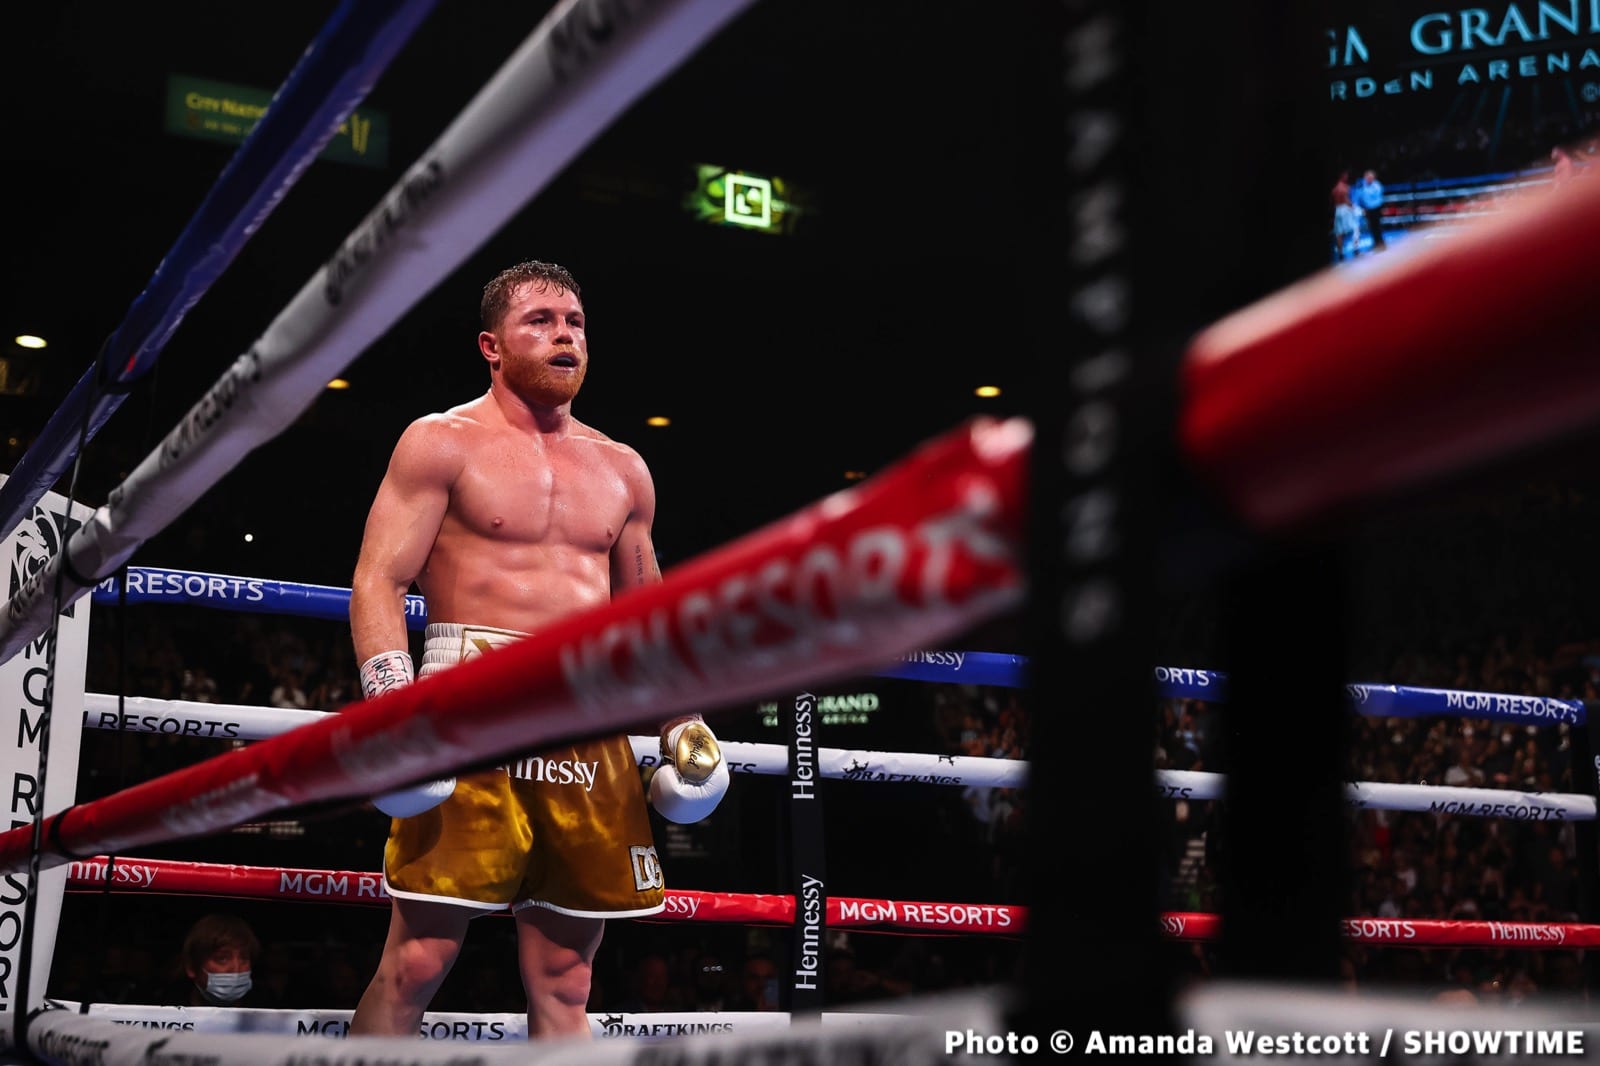 WBC approves Canelo to challenge Ilunga Makabu for his cruiserweight title in 2022